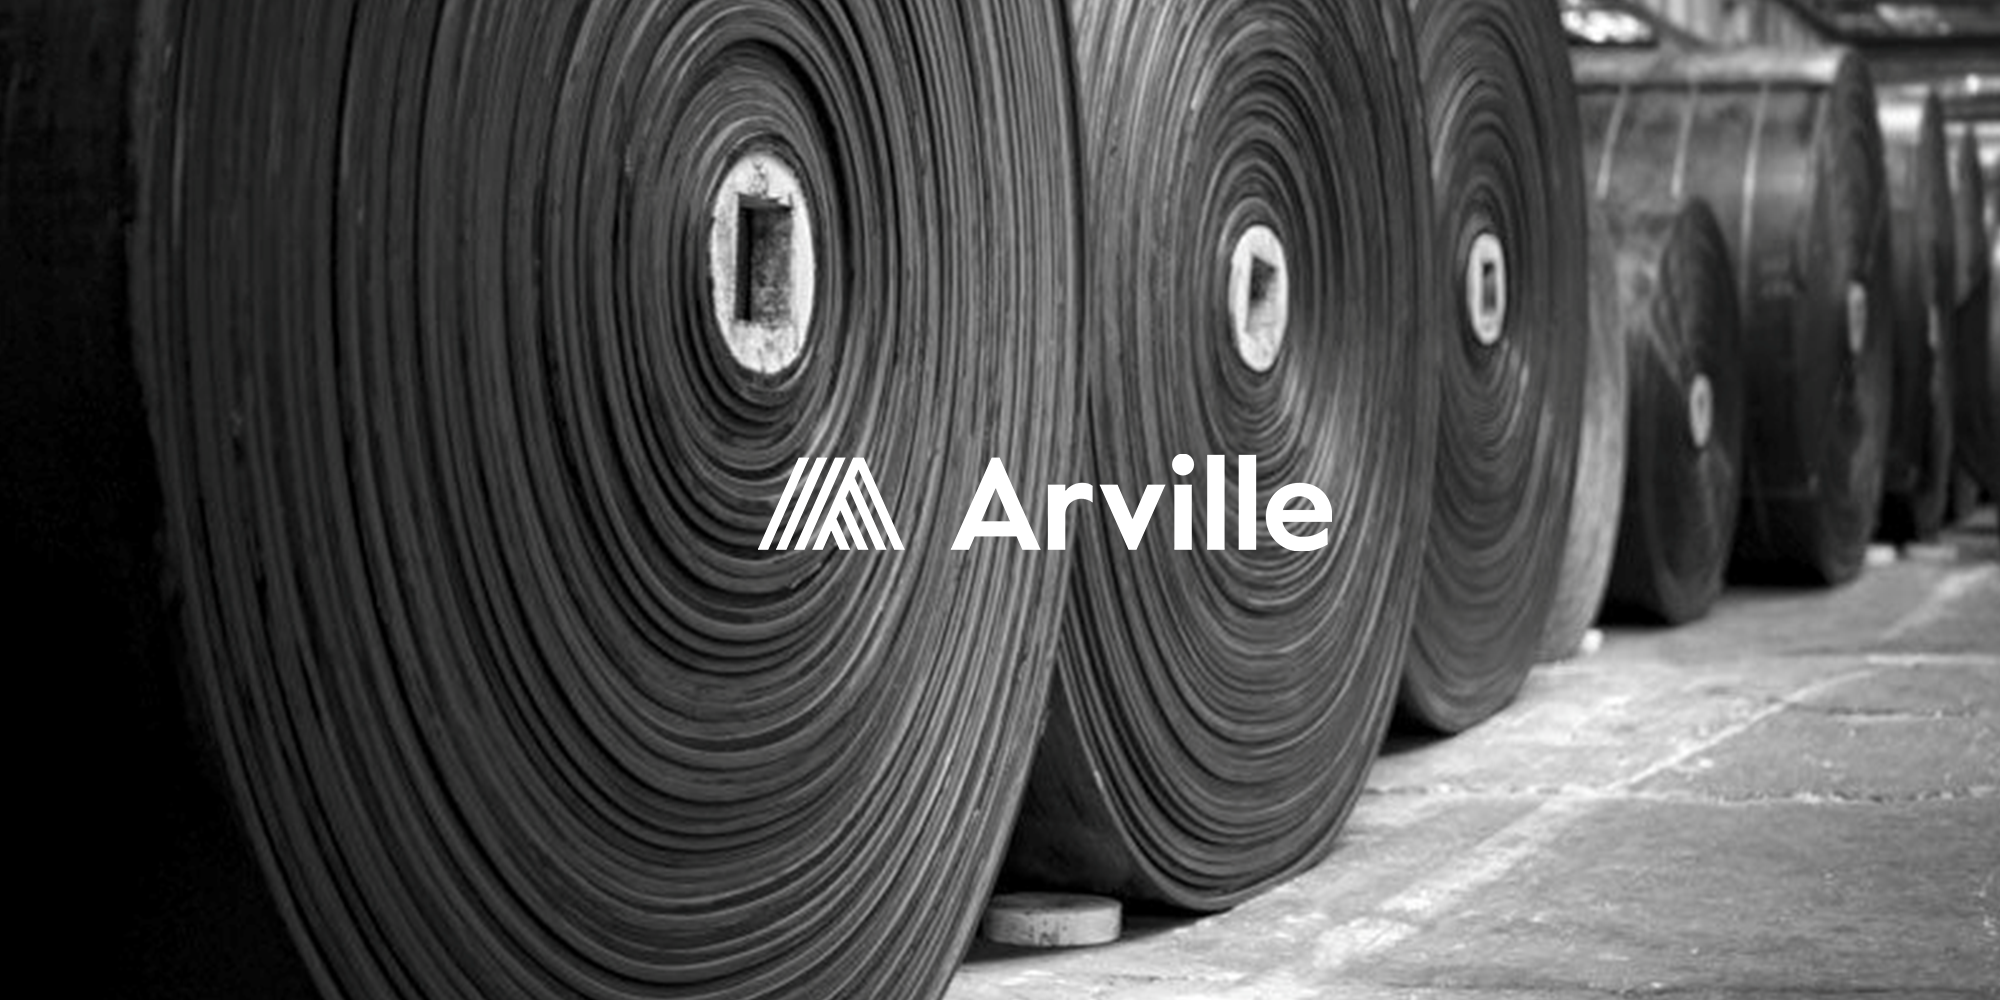 Arville with some fabric reems